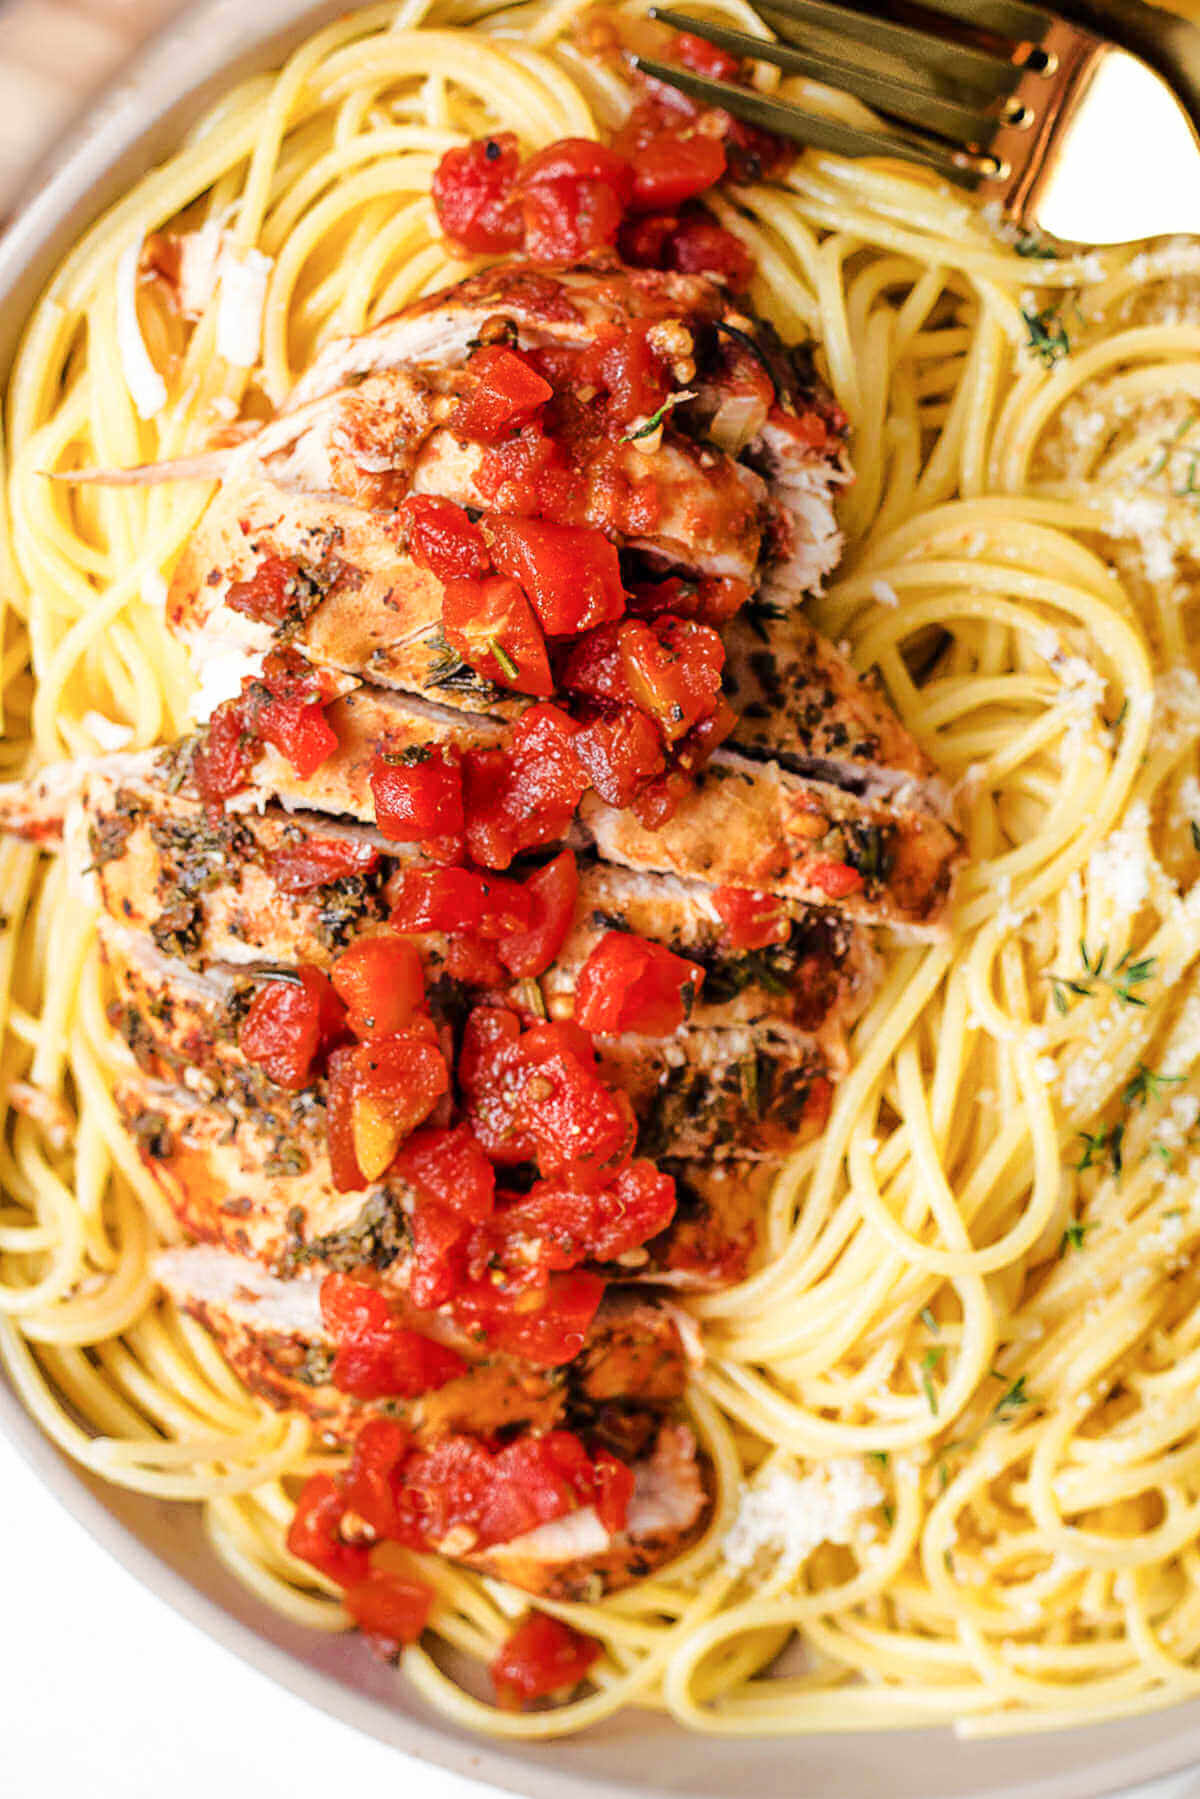 balsamic chicken sliced on top of a bed of spaghetti garnished with grated parmesan cheese.